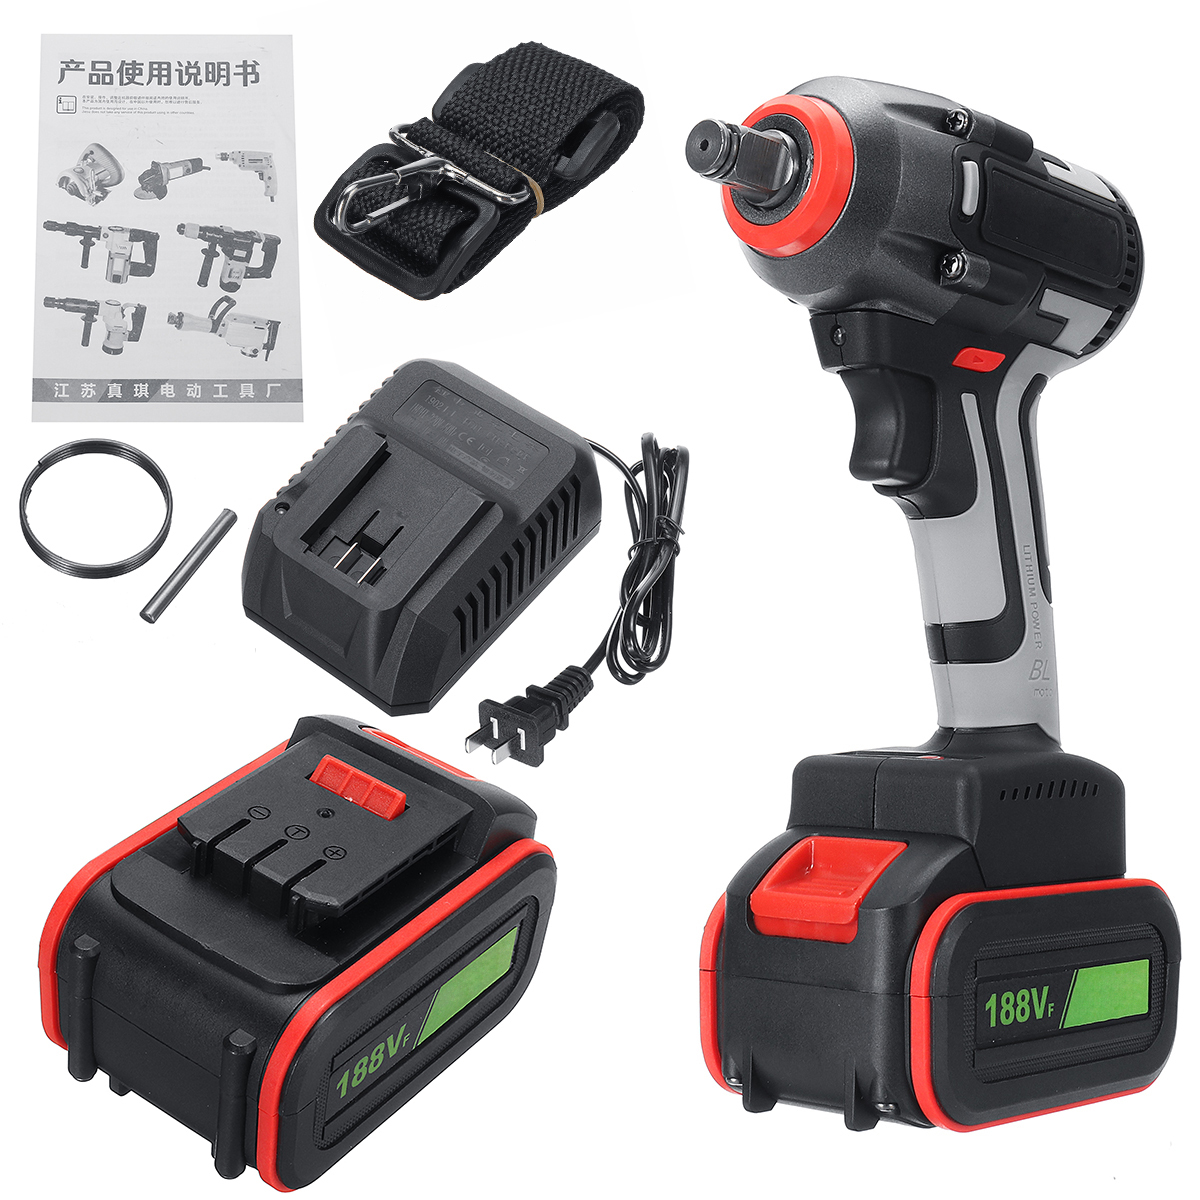 100-240V-Torque-450NM-Electric-Impact-Wrench-Cordless-Motor-Brushless-Rattle-Driver-1444636-6